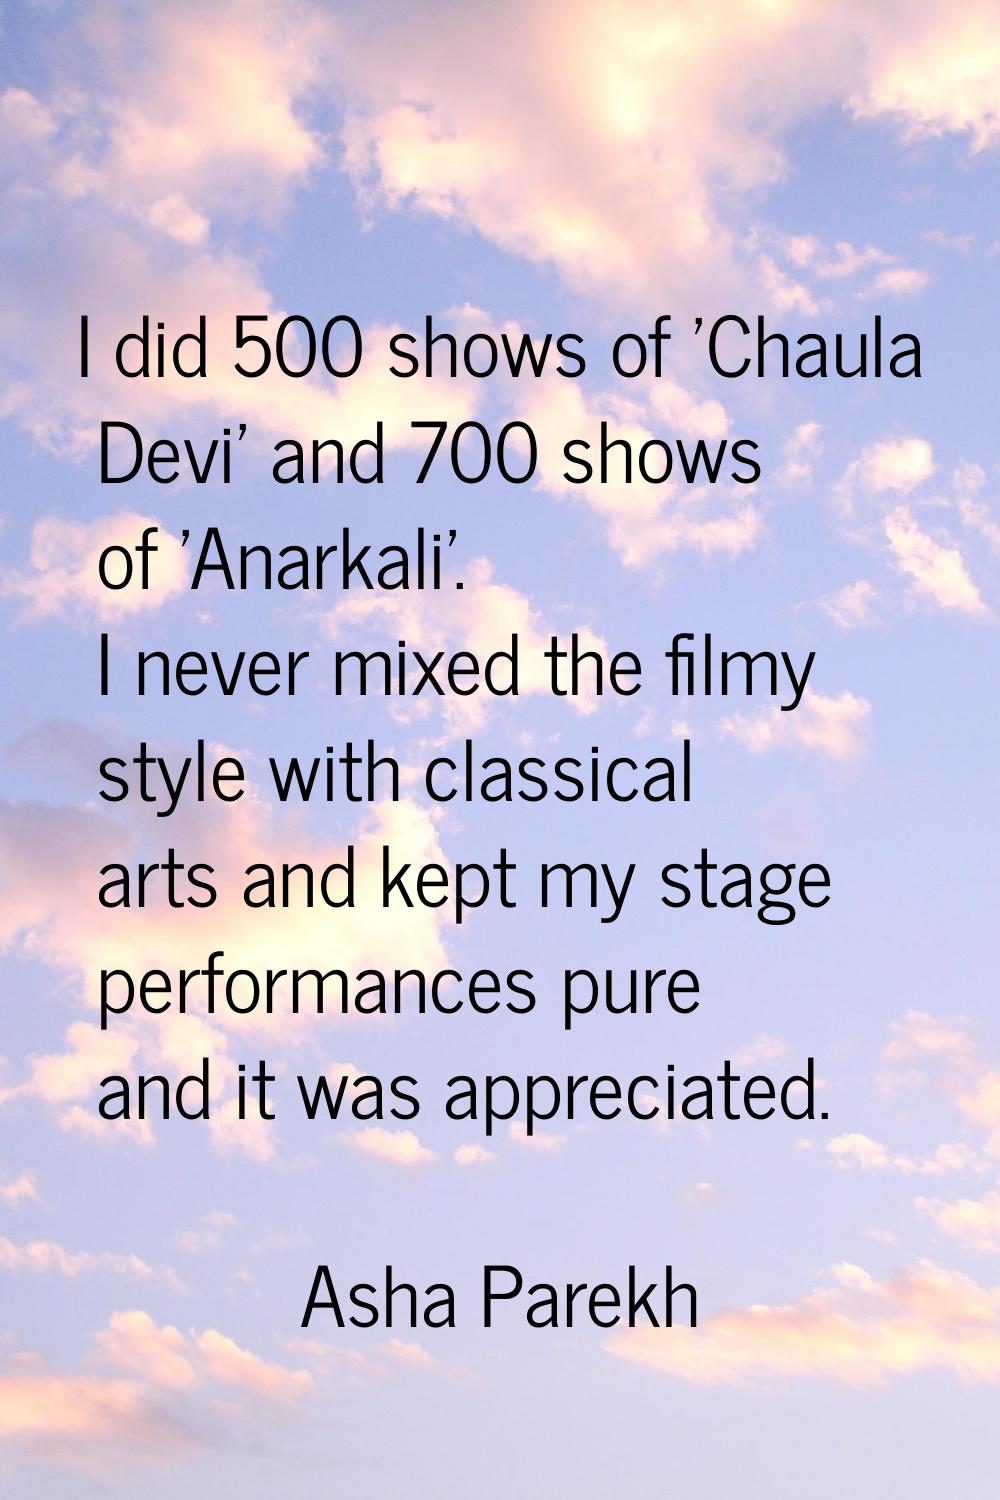 I did 500 shows of 'Chaula Devi' and 700 shows of 'Anarkali'. I never mixed the filmy style with cl